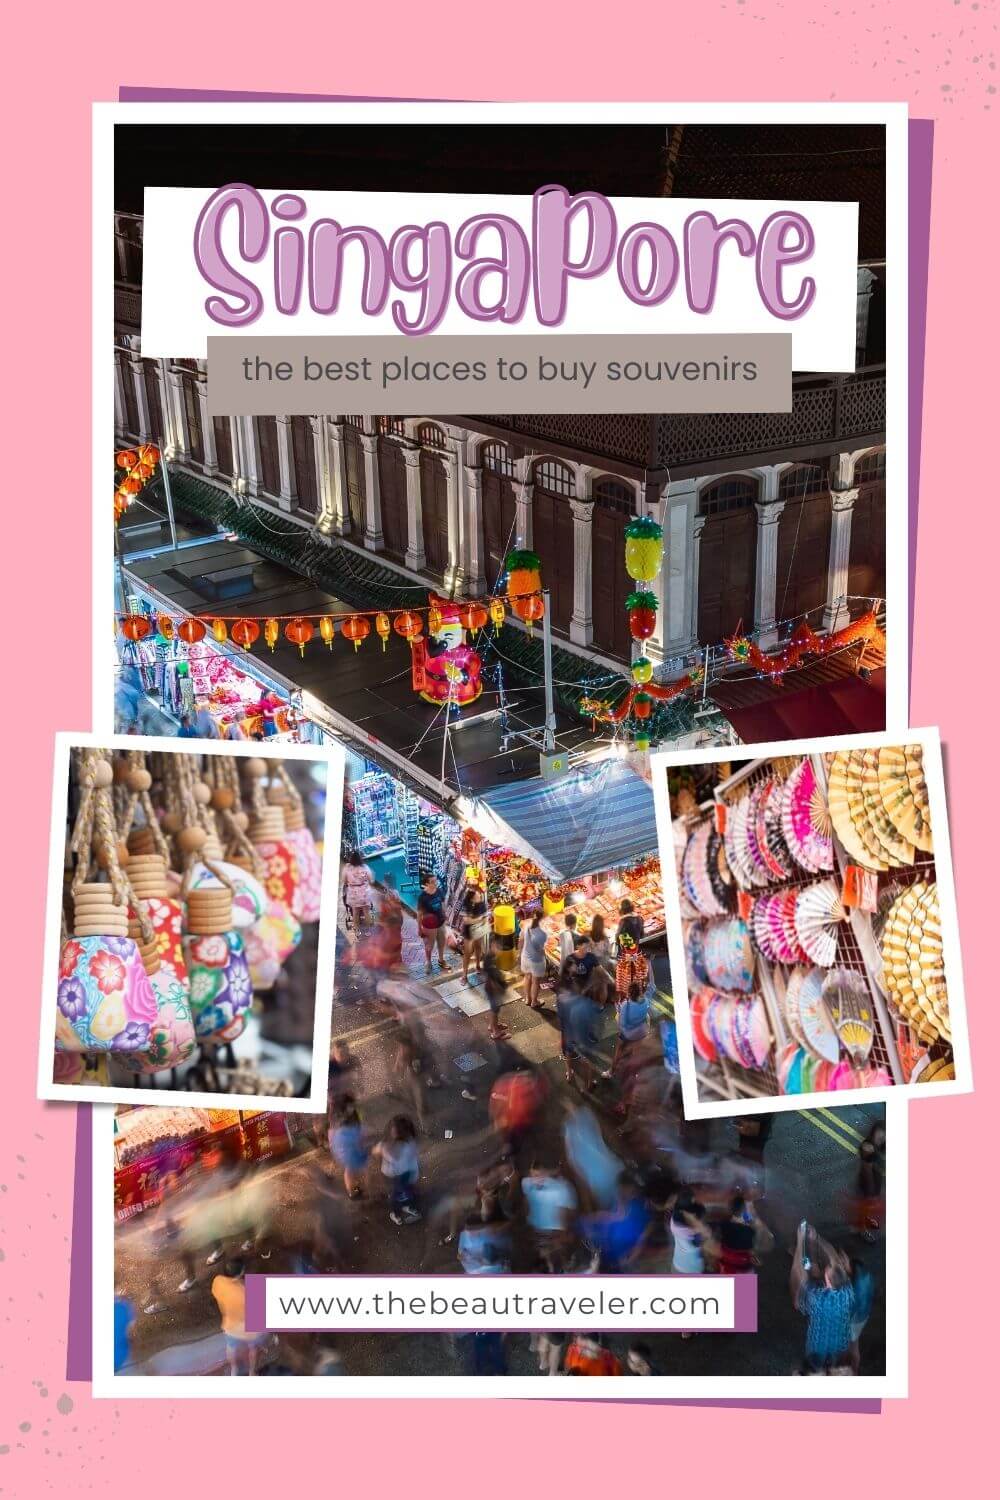 Here Are 5 of the Best Places to Buy Souvenirs in Singapore - The BeauTraveler